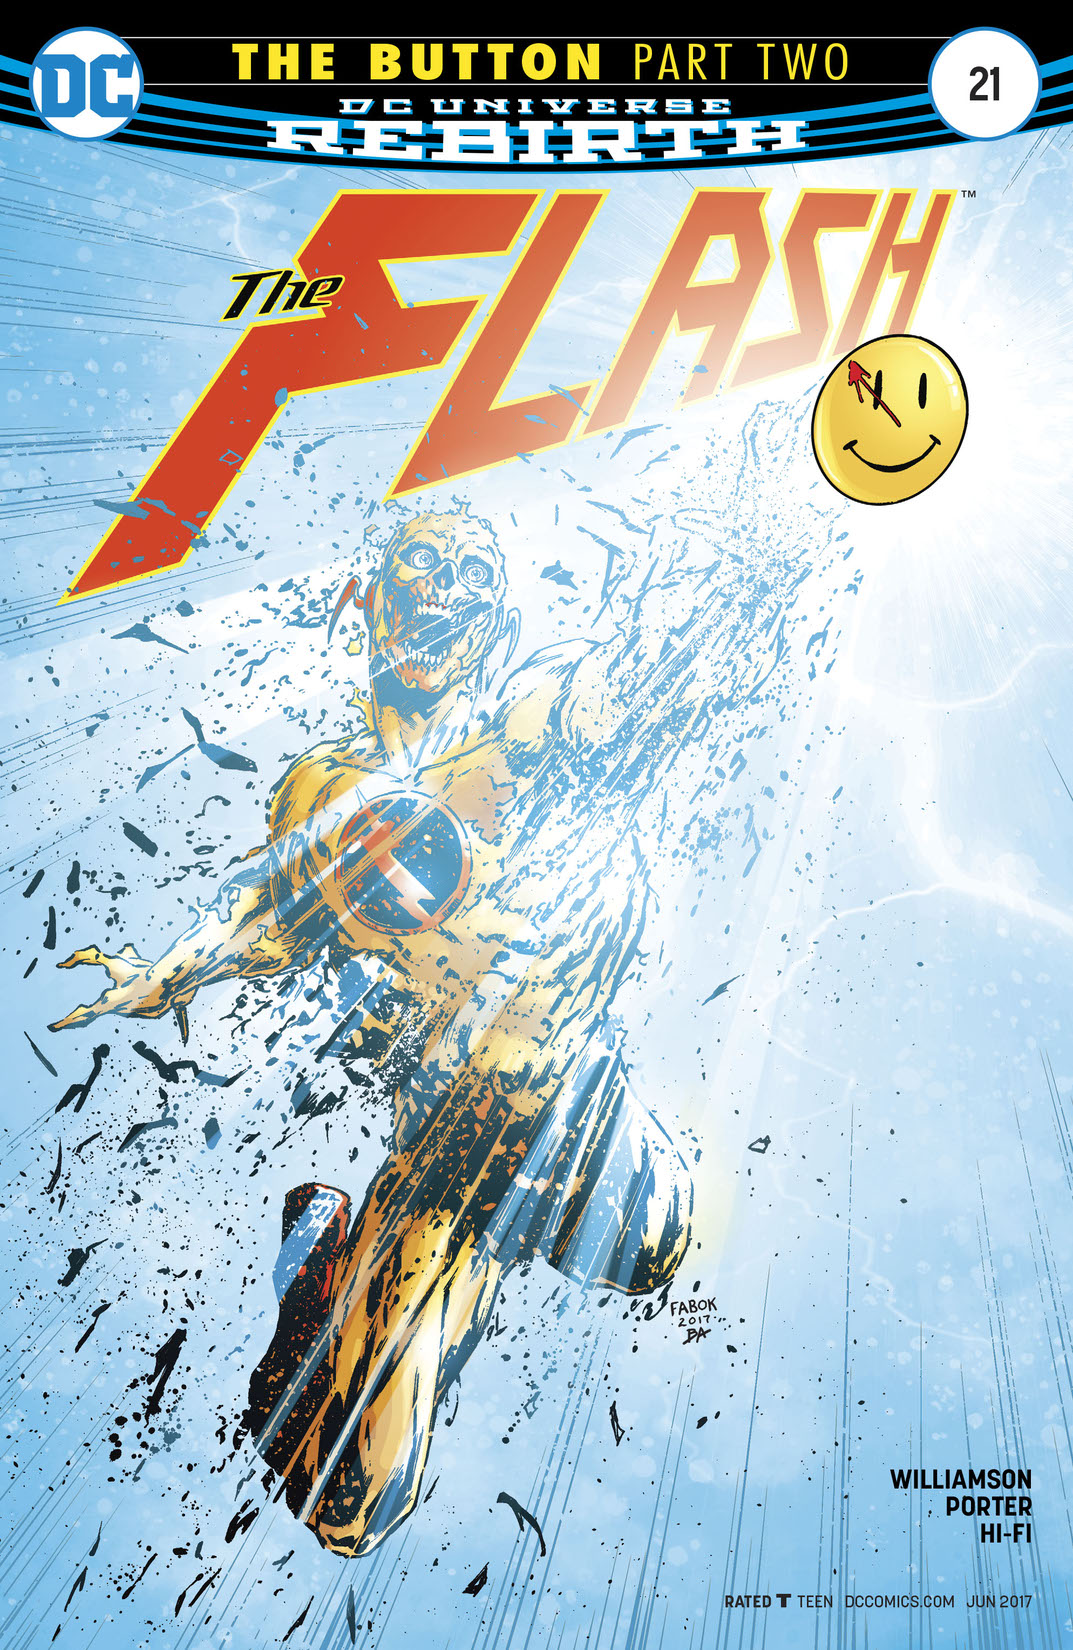 The Flash (2016-) #21 preview images